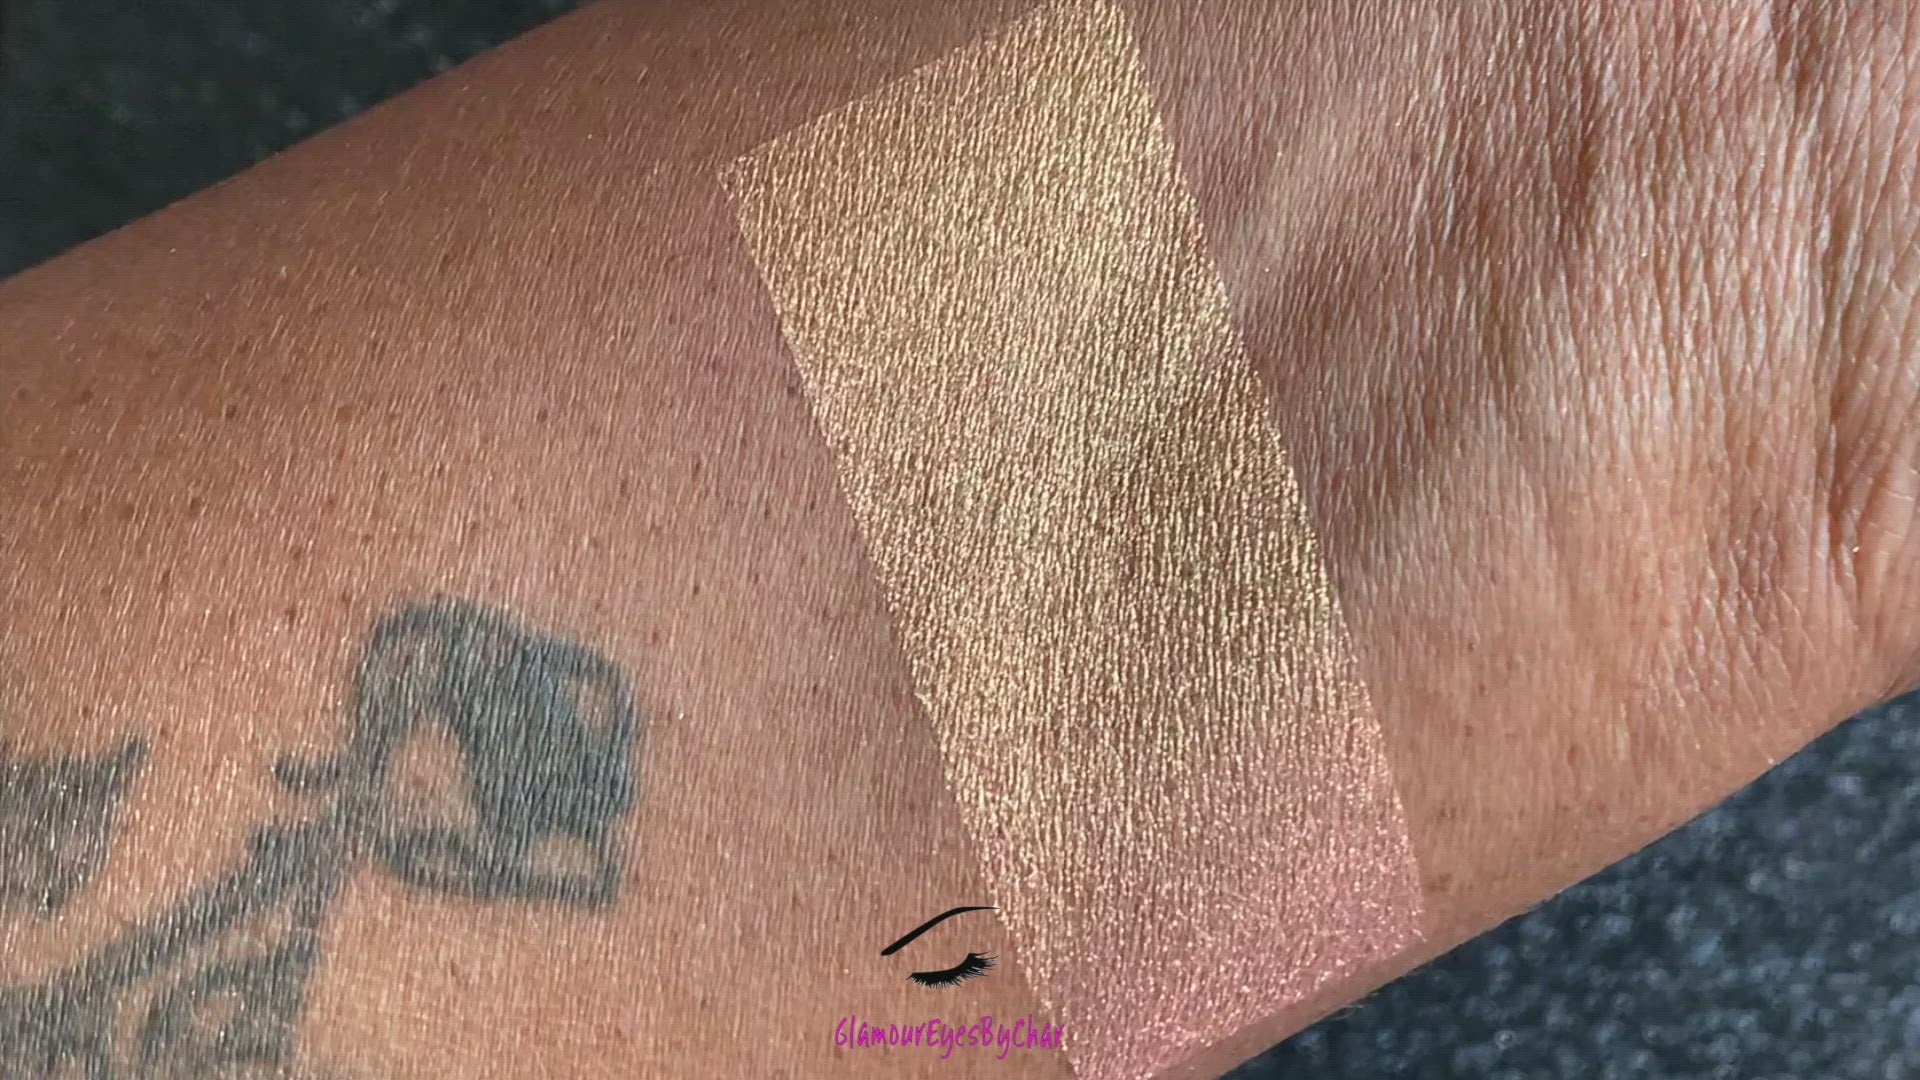  Nefertiti Glamlighter is a light golden with hints of warm orange shade and can be applied as a highlighter or an eyeshadow. Nefertiti is perfect for bold highlighter wearers. A little will go a long way!